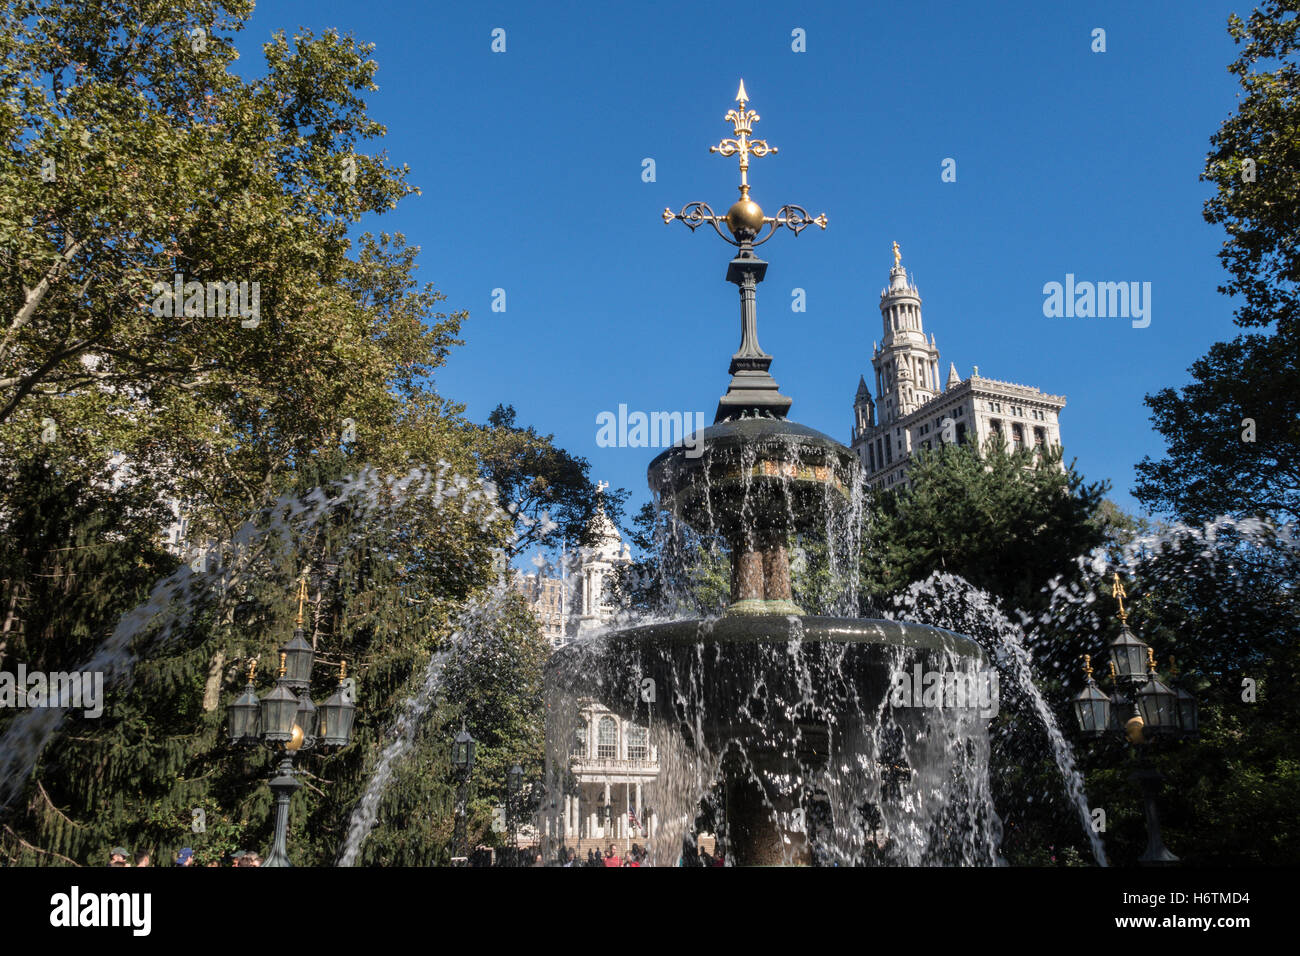 The Mould Fountain, City Hall Park, NYC Stock Photo